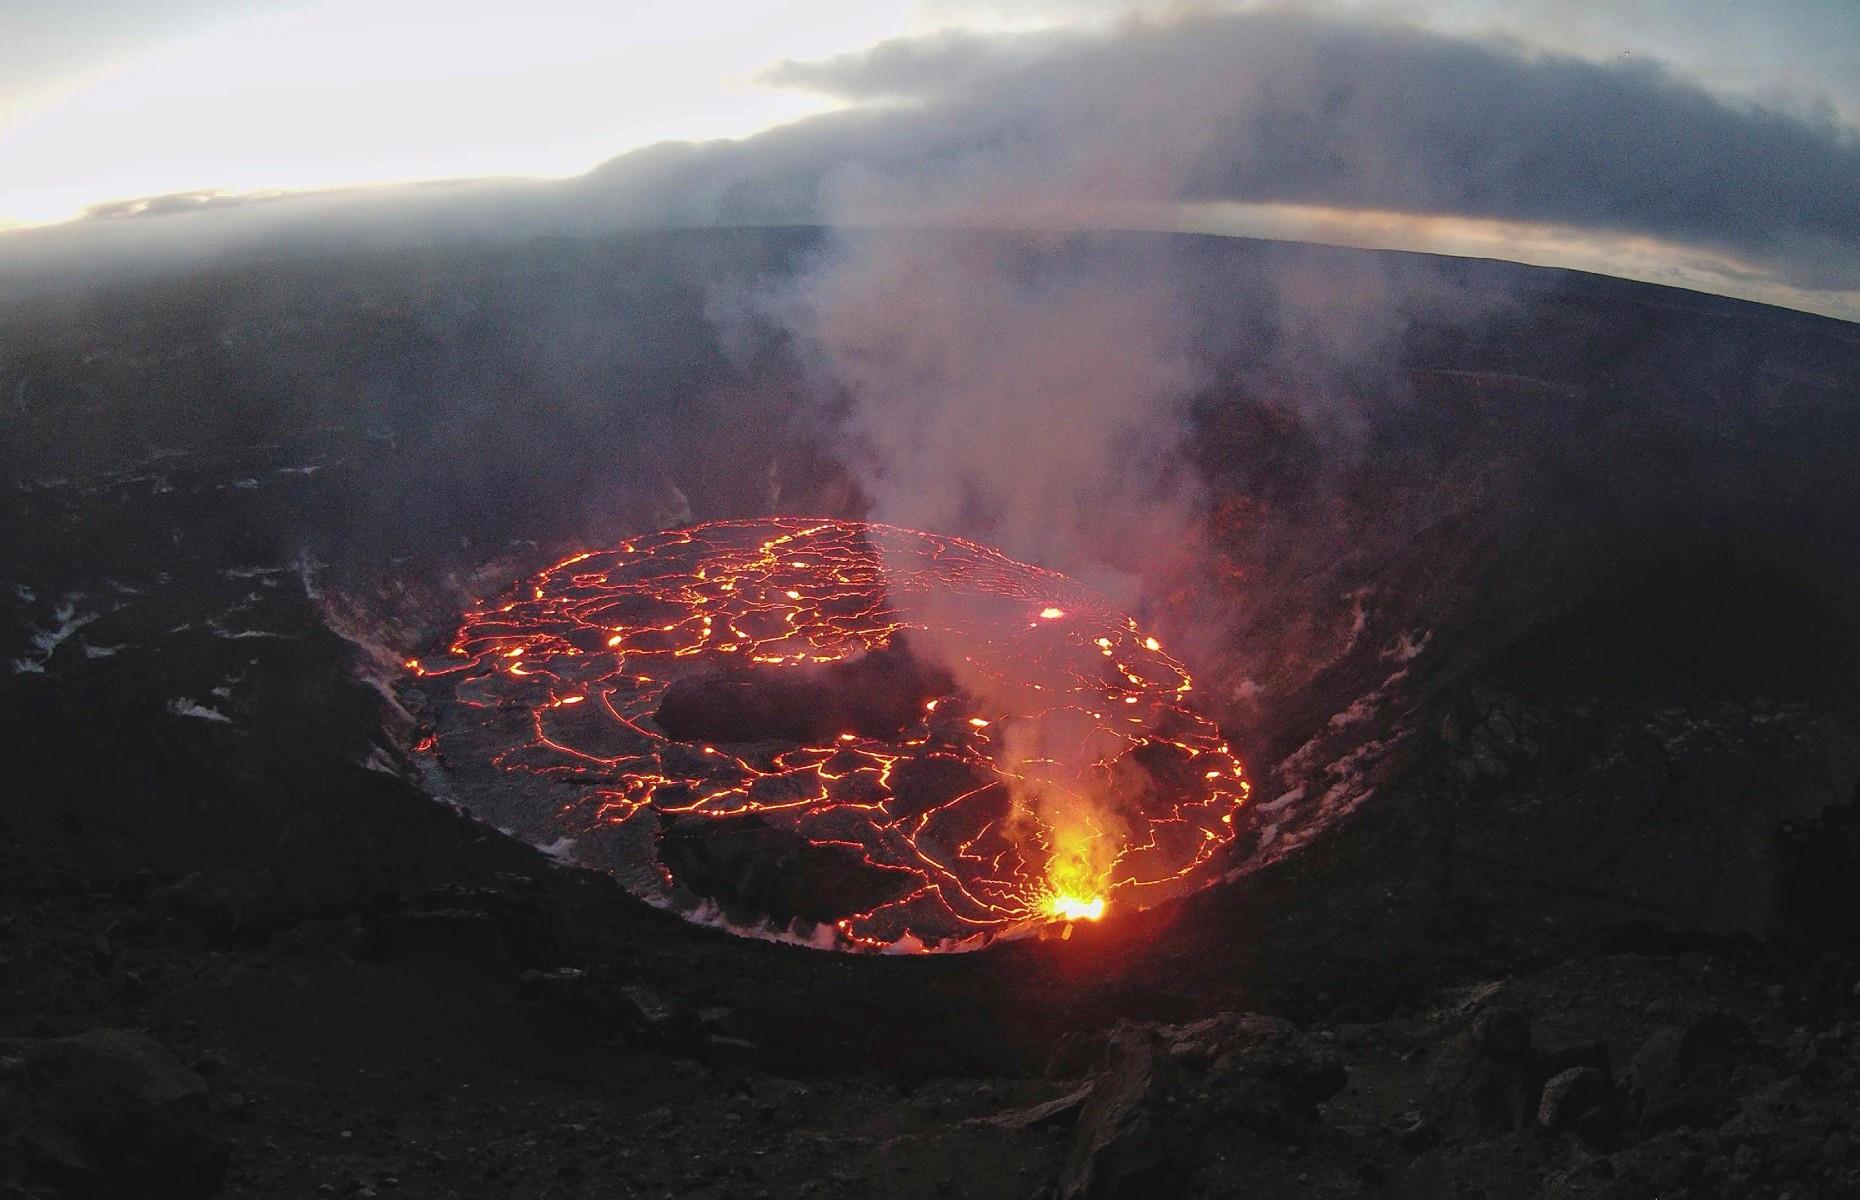 <p>Kilauea is in the southeast of Big Island is the most active volcano in the world. <a href="https://www.britannica.com/place/Kilauea">Its most active vent is Halema‘uma‘u</a>, the legendary home of Pele, the Hawaiian fire goddess. It's been 200 years since its last explosive eruptions (scores of deaths occurred here in 1790) and in recent years eruptions are usually contained by the lava lake within the crater.</p>